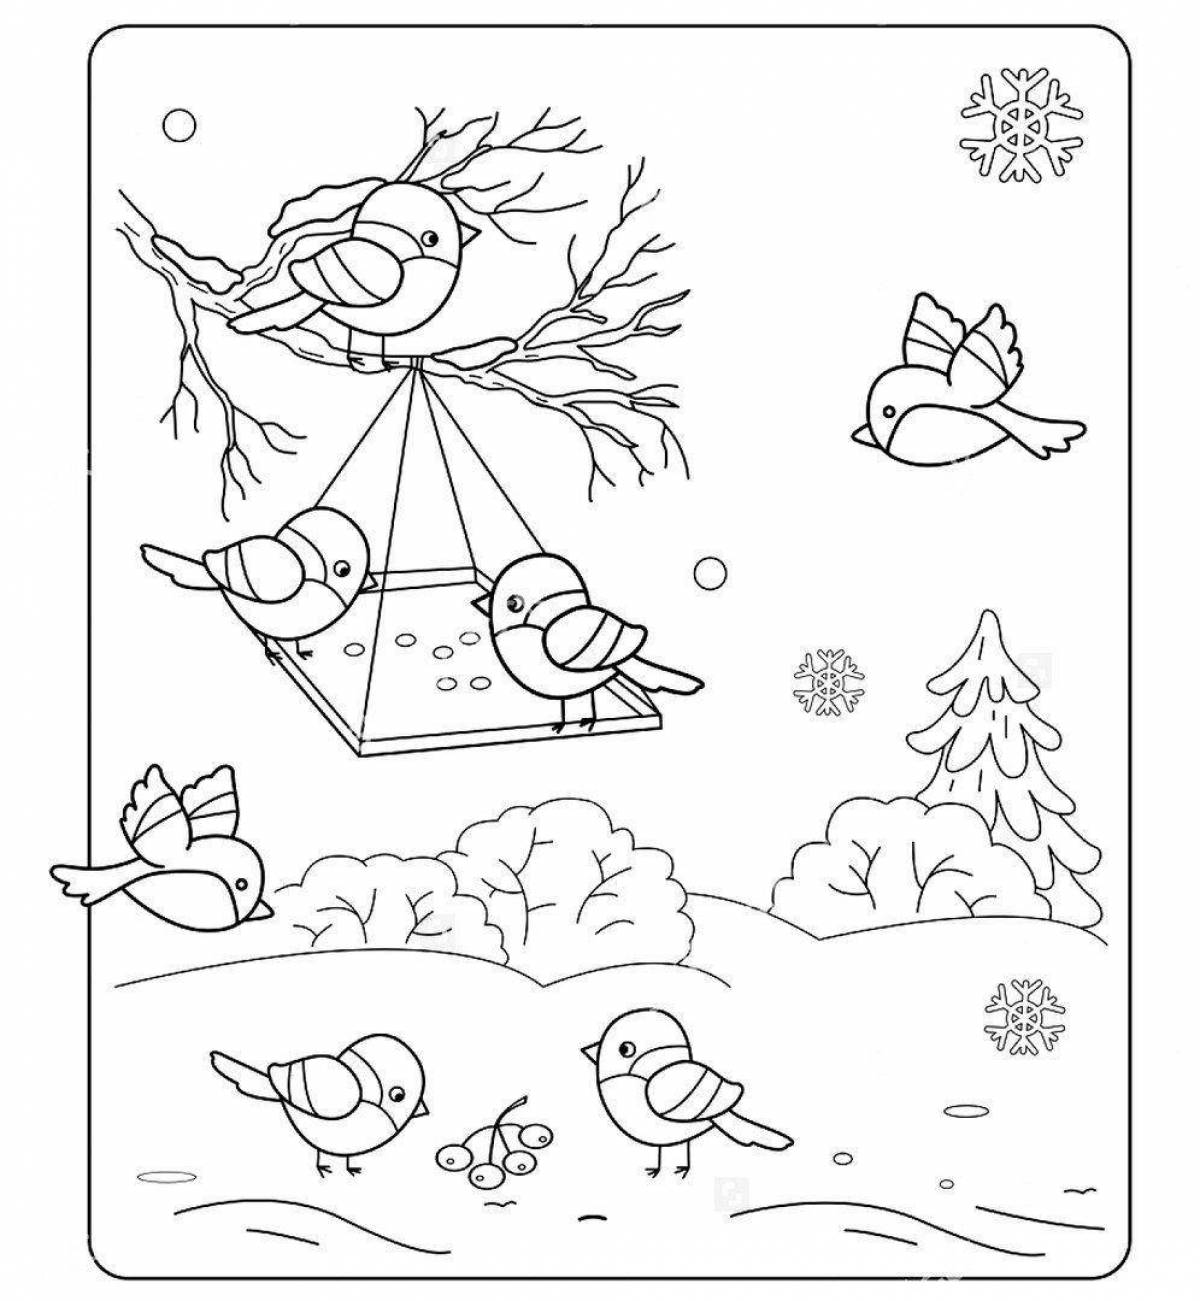 Radiant coloring page bird feeding in winter